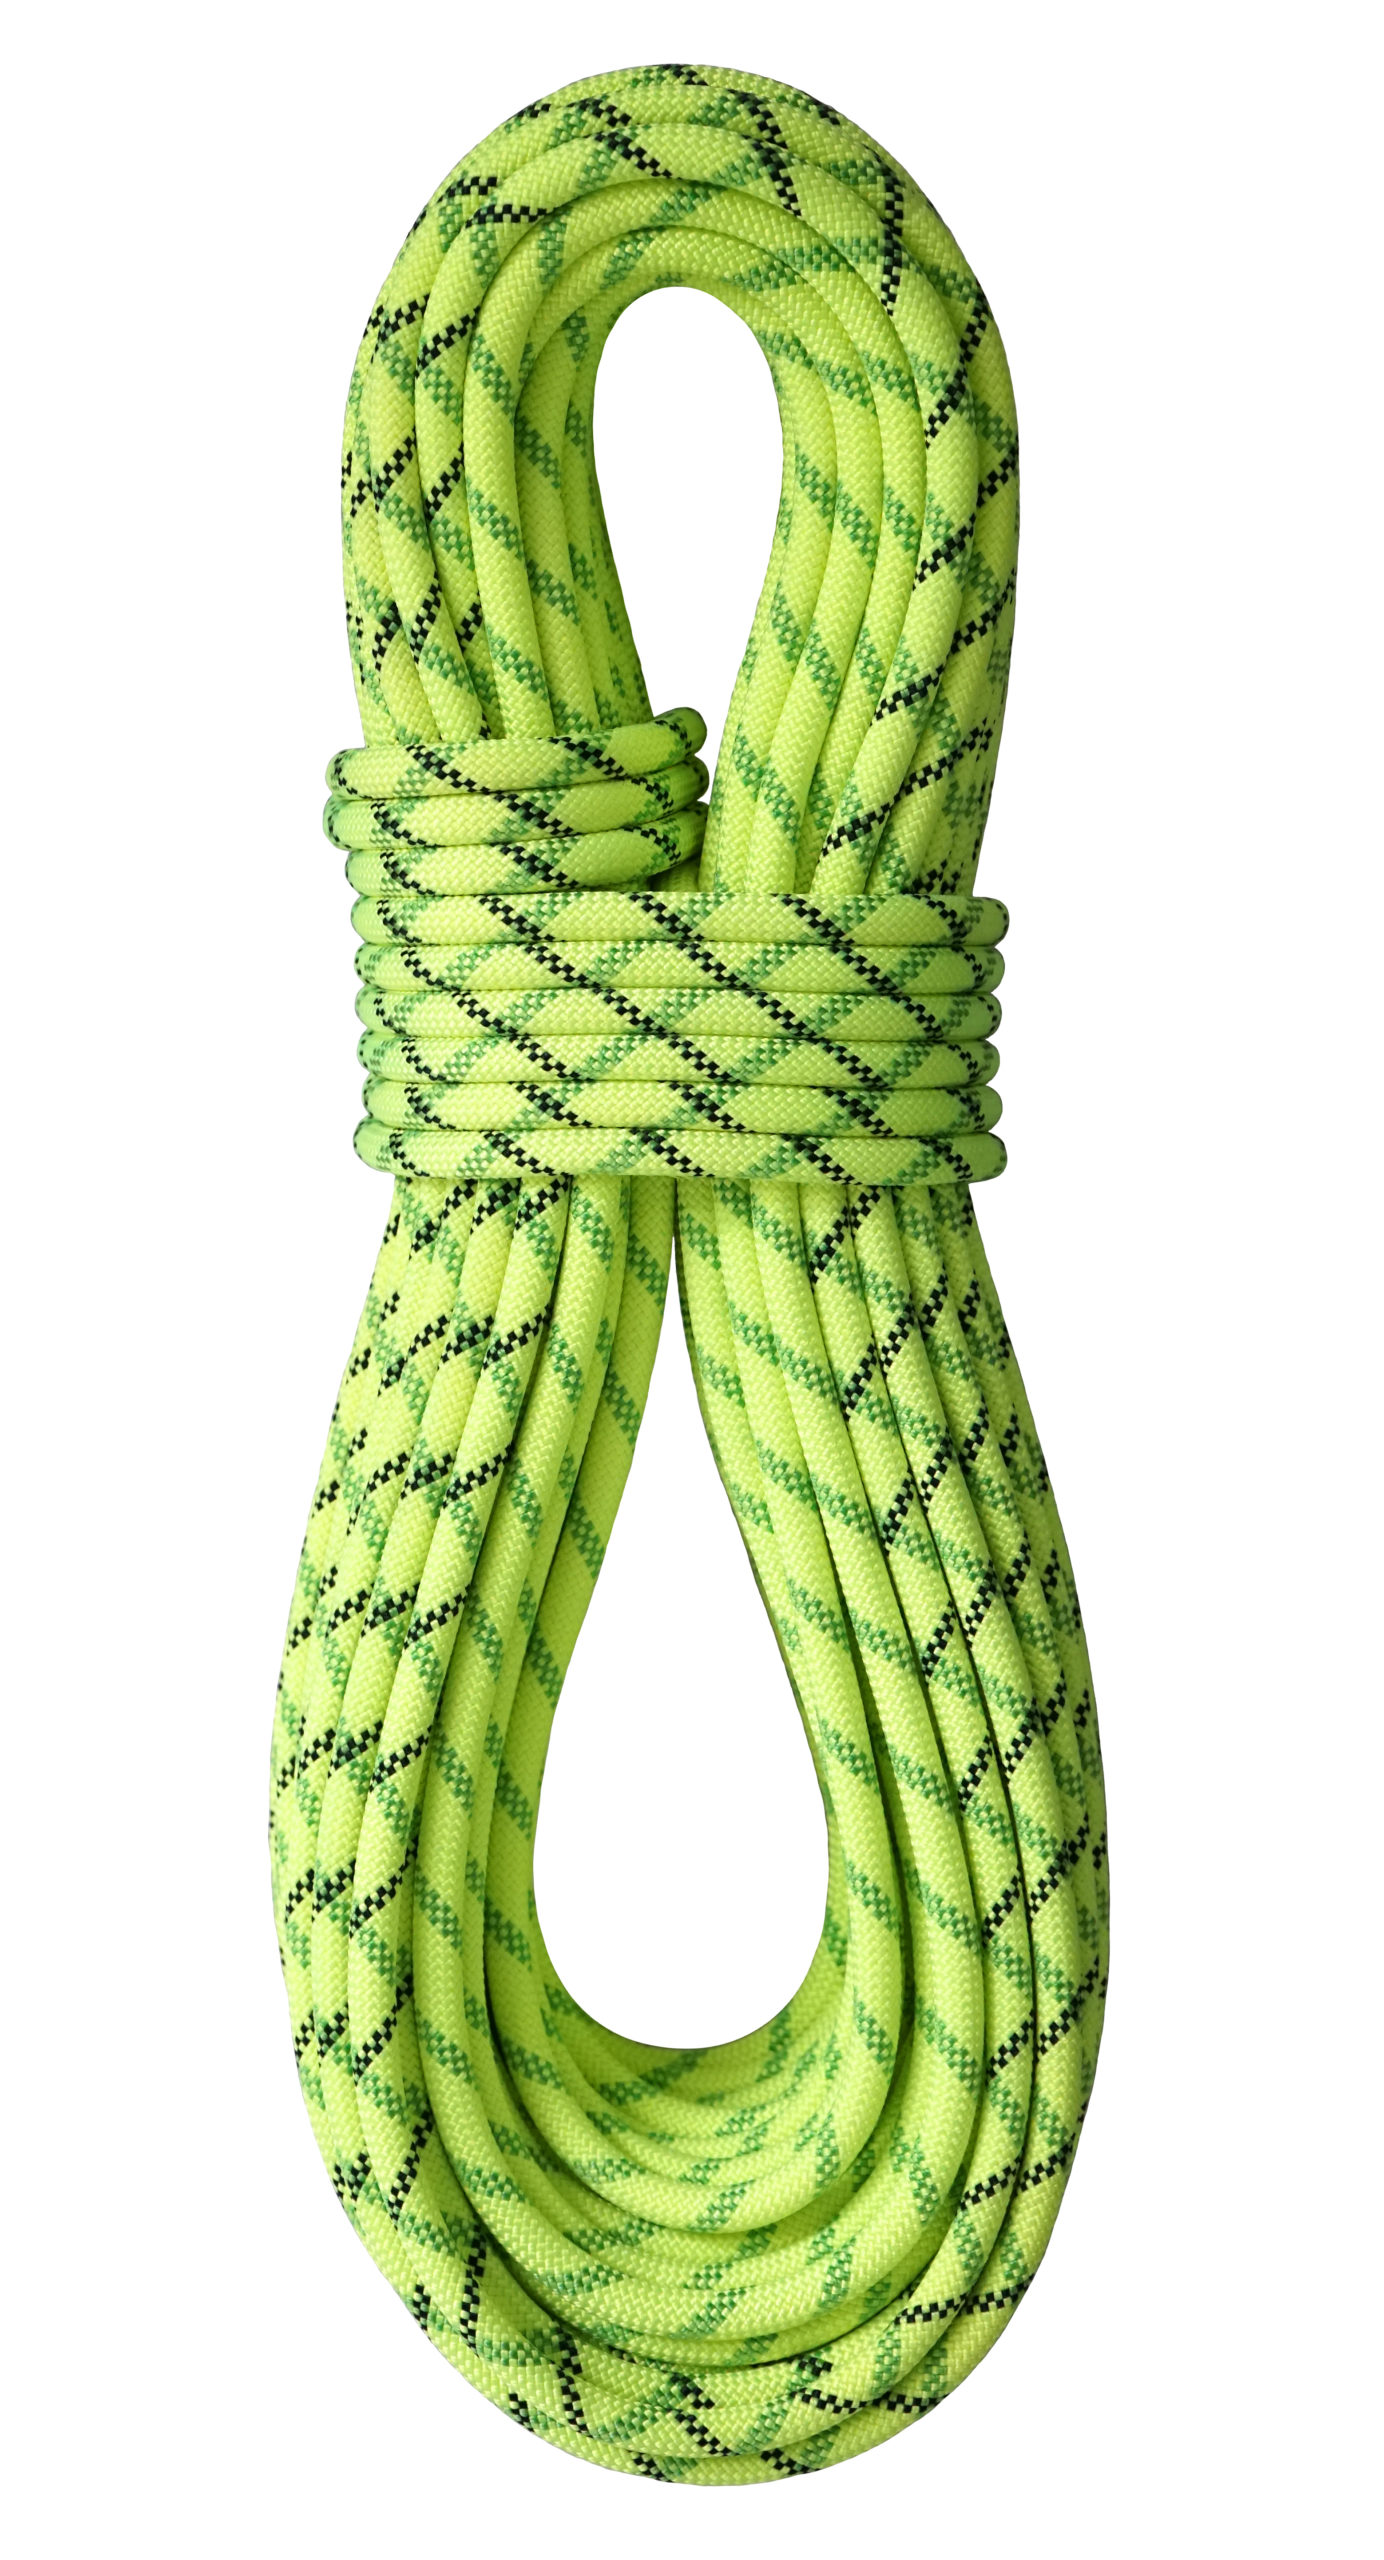 Six Flavor jazz static or dynamic rope for climbing crack A